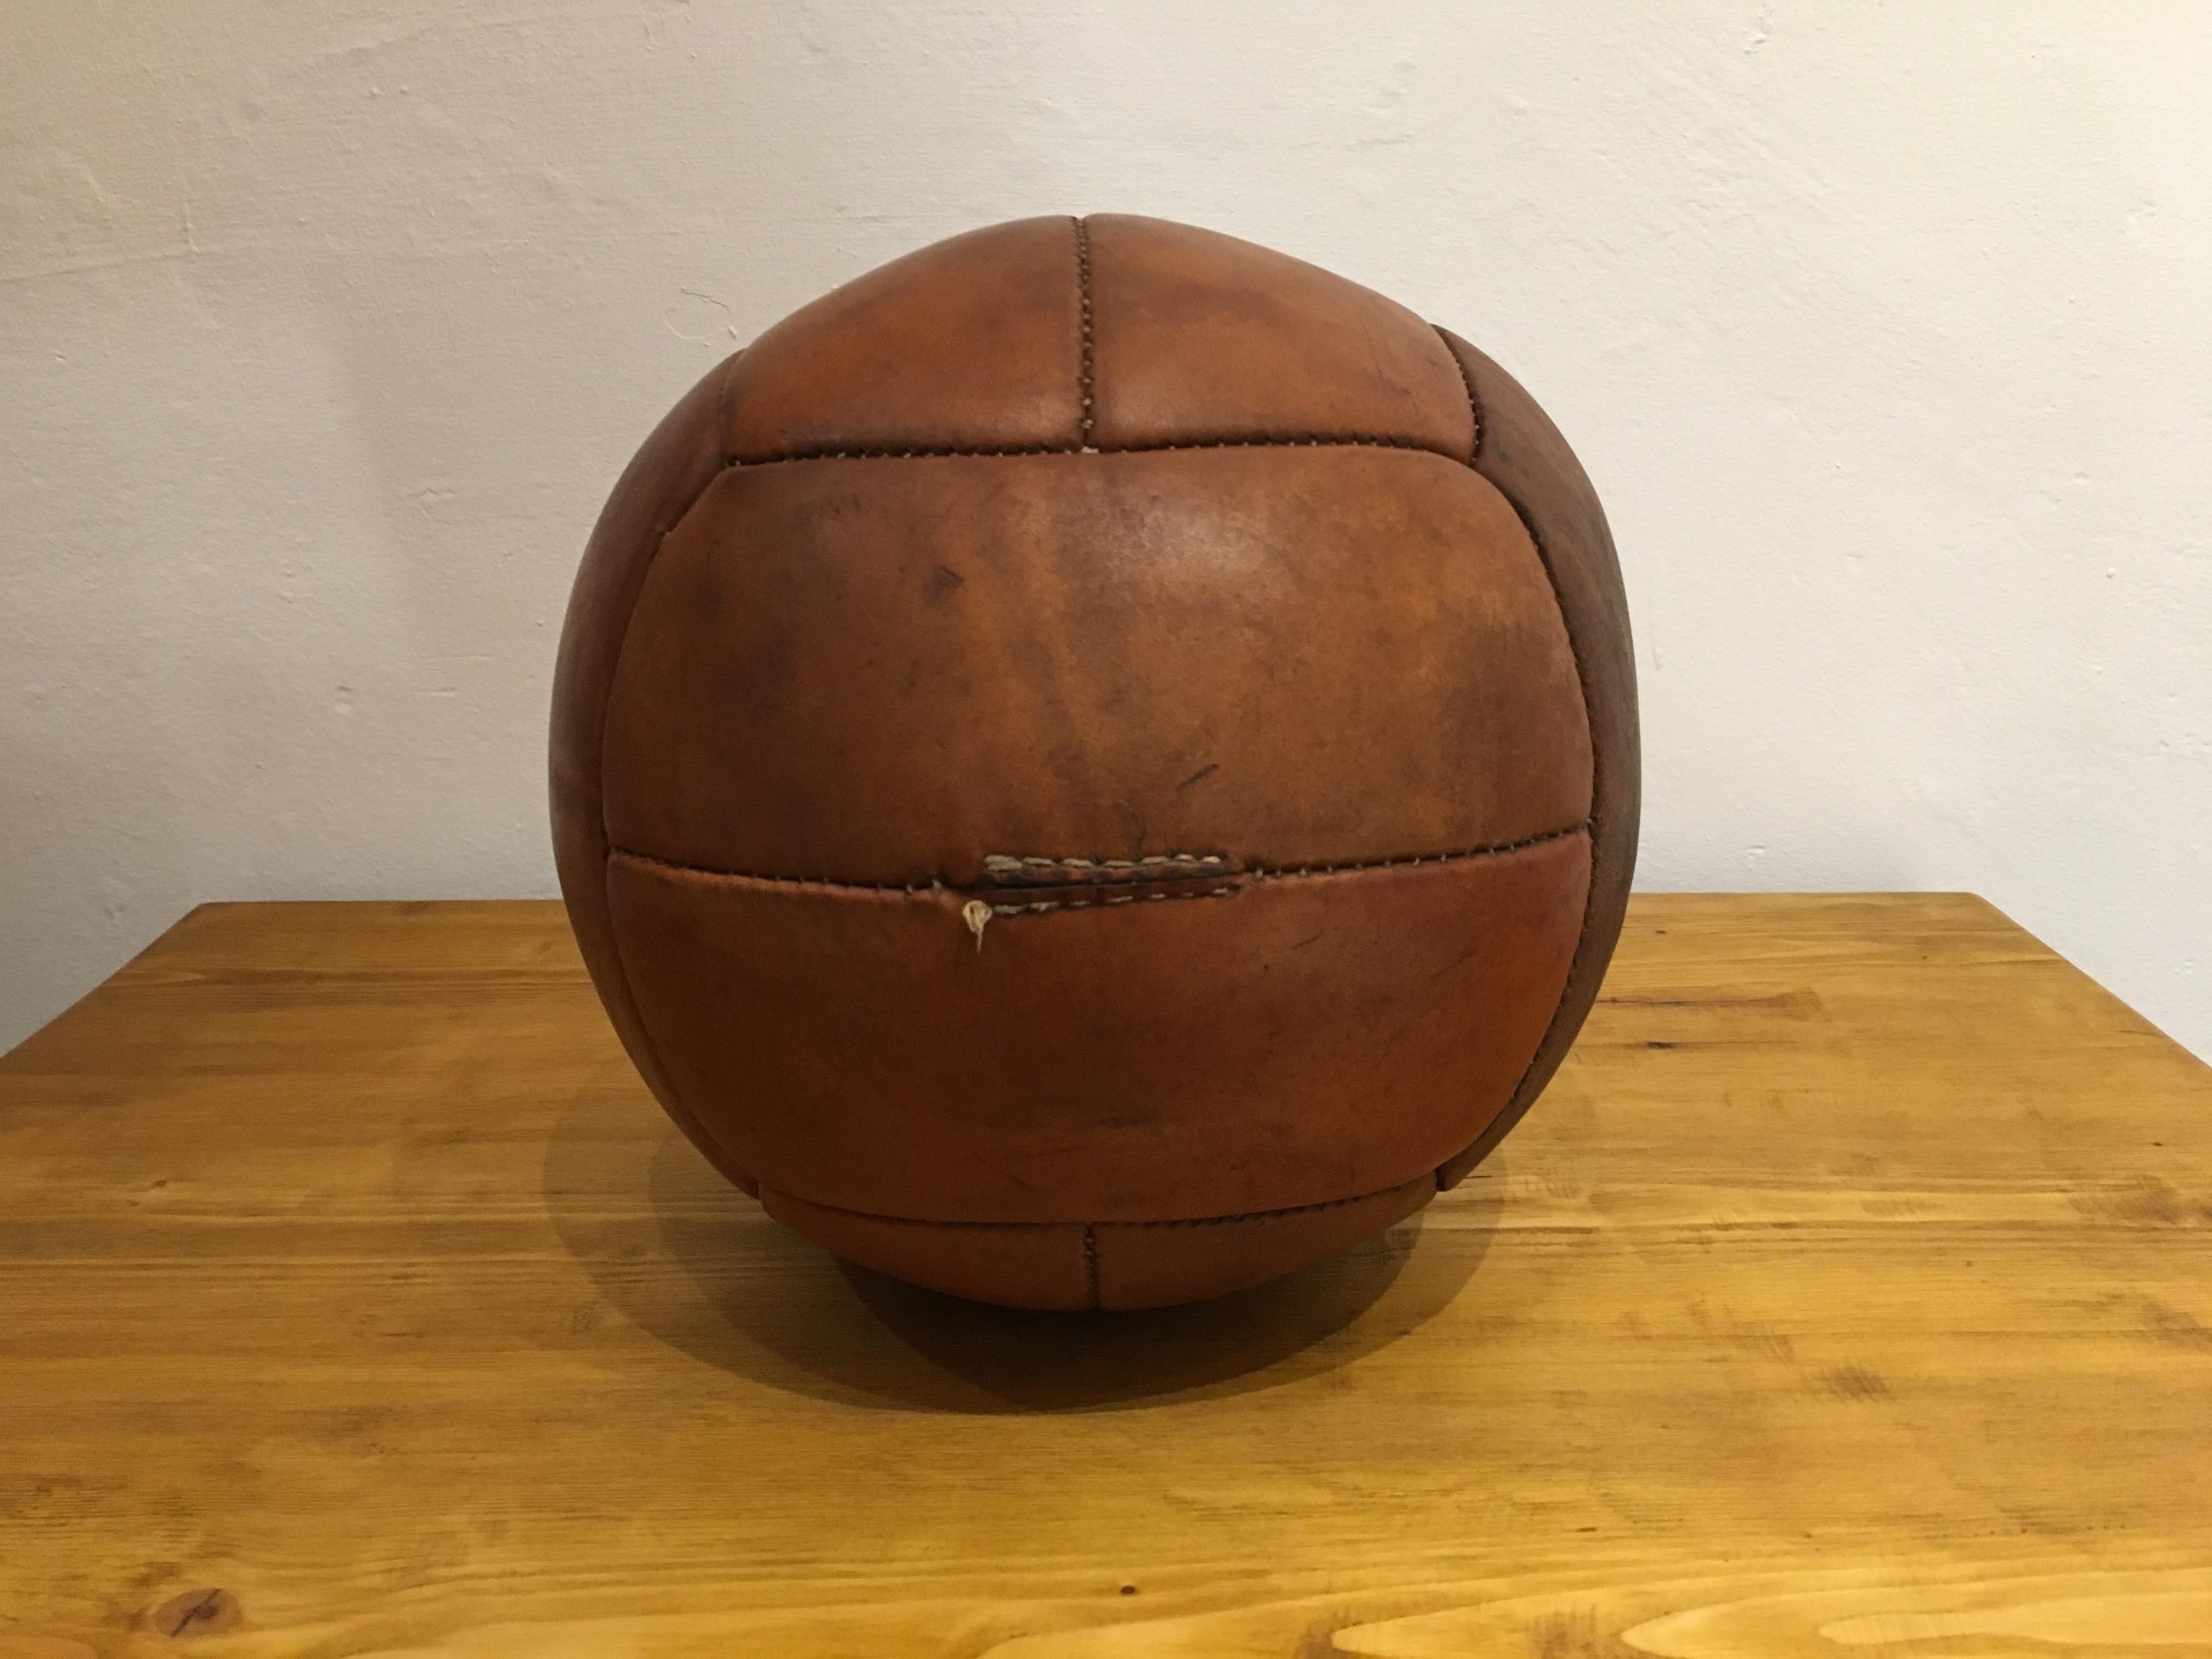 This medicine ball comes from the stock of an old Czech gymnasium. Made in the 1930s. Patina consistent with age and use. Cleaned and treated with a special leather care. Weight: 3kg. Measures: Diameter 10.2 inch.
 